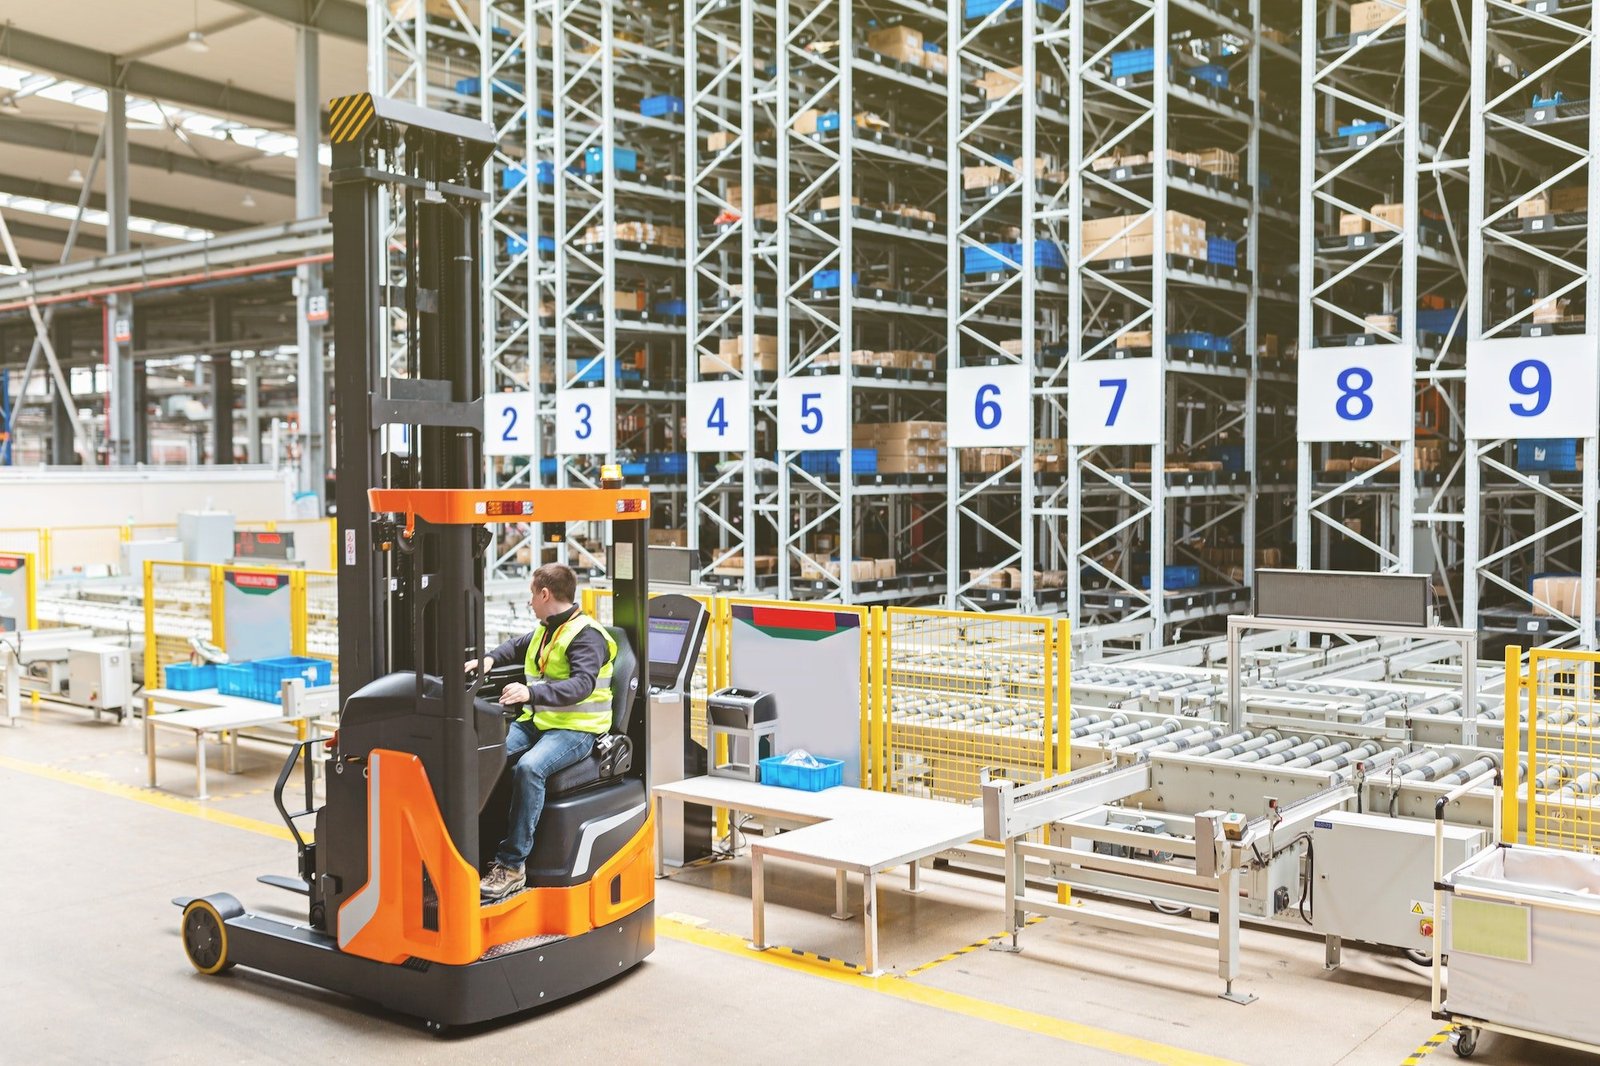 Storehouse employee in uniform working on reachtruck in modern automatic warehouse.